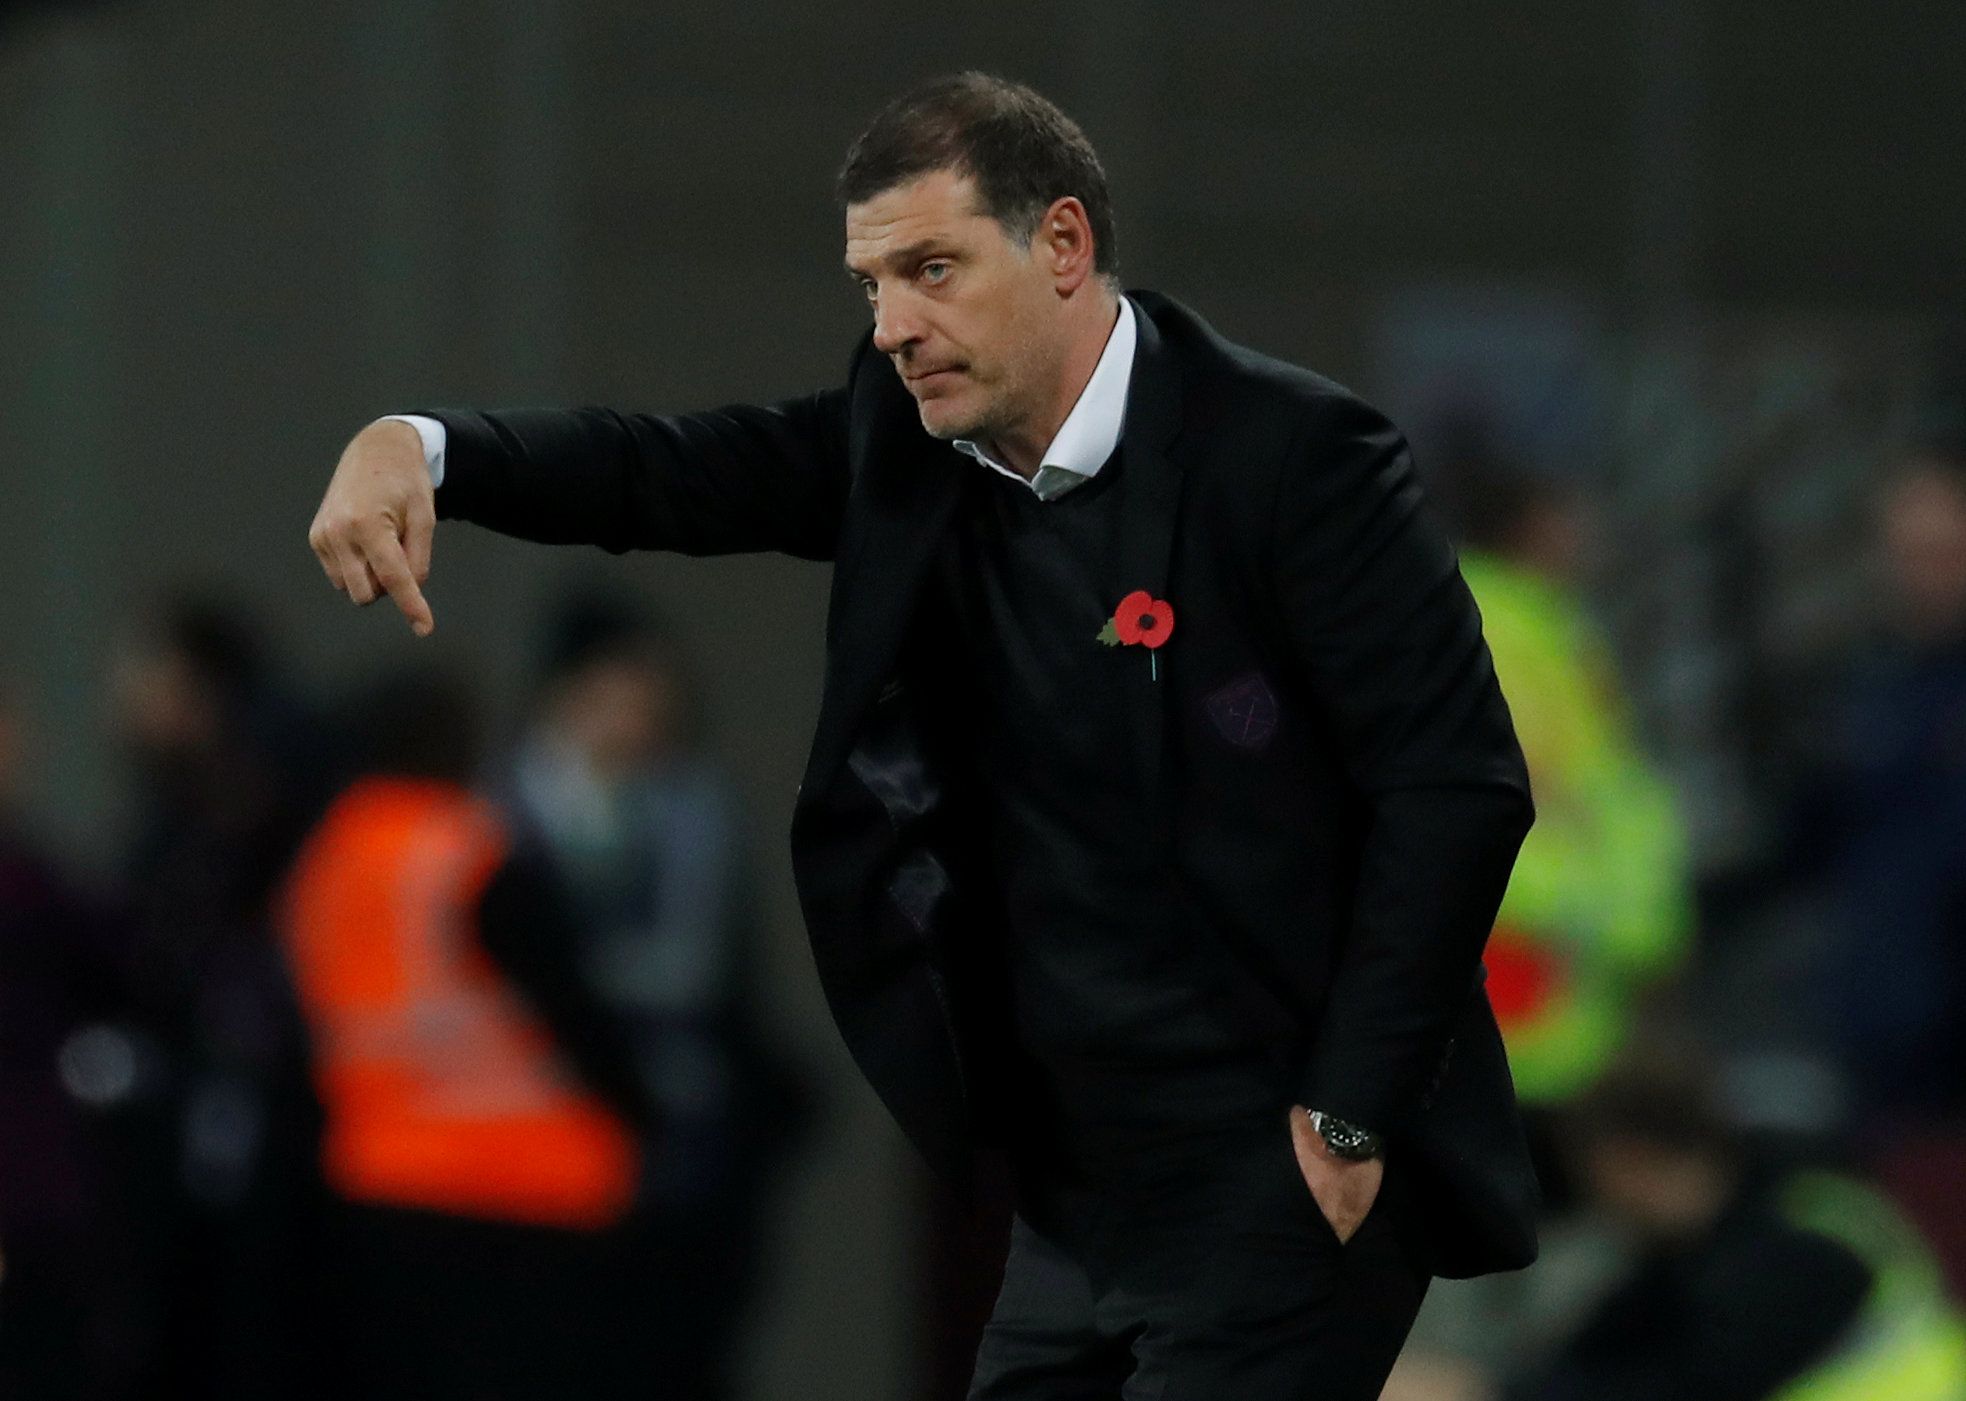 Soccer Football - Premier League - West Ham United vs Liverpool - London Stadium, London, Britain - November 4, 2017   West Ham United manager Slaven Bilic              Action Images via Reuters/Andrew Couldridge  EDITORIAL USE ONLY. No use with unauthorized audio, video, data, fixture lists, club/league logos or 